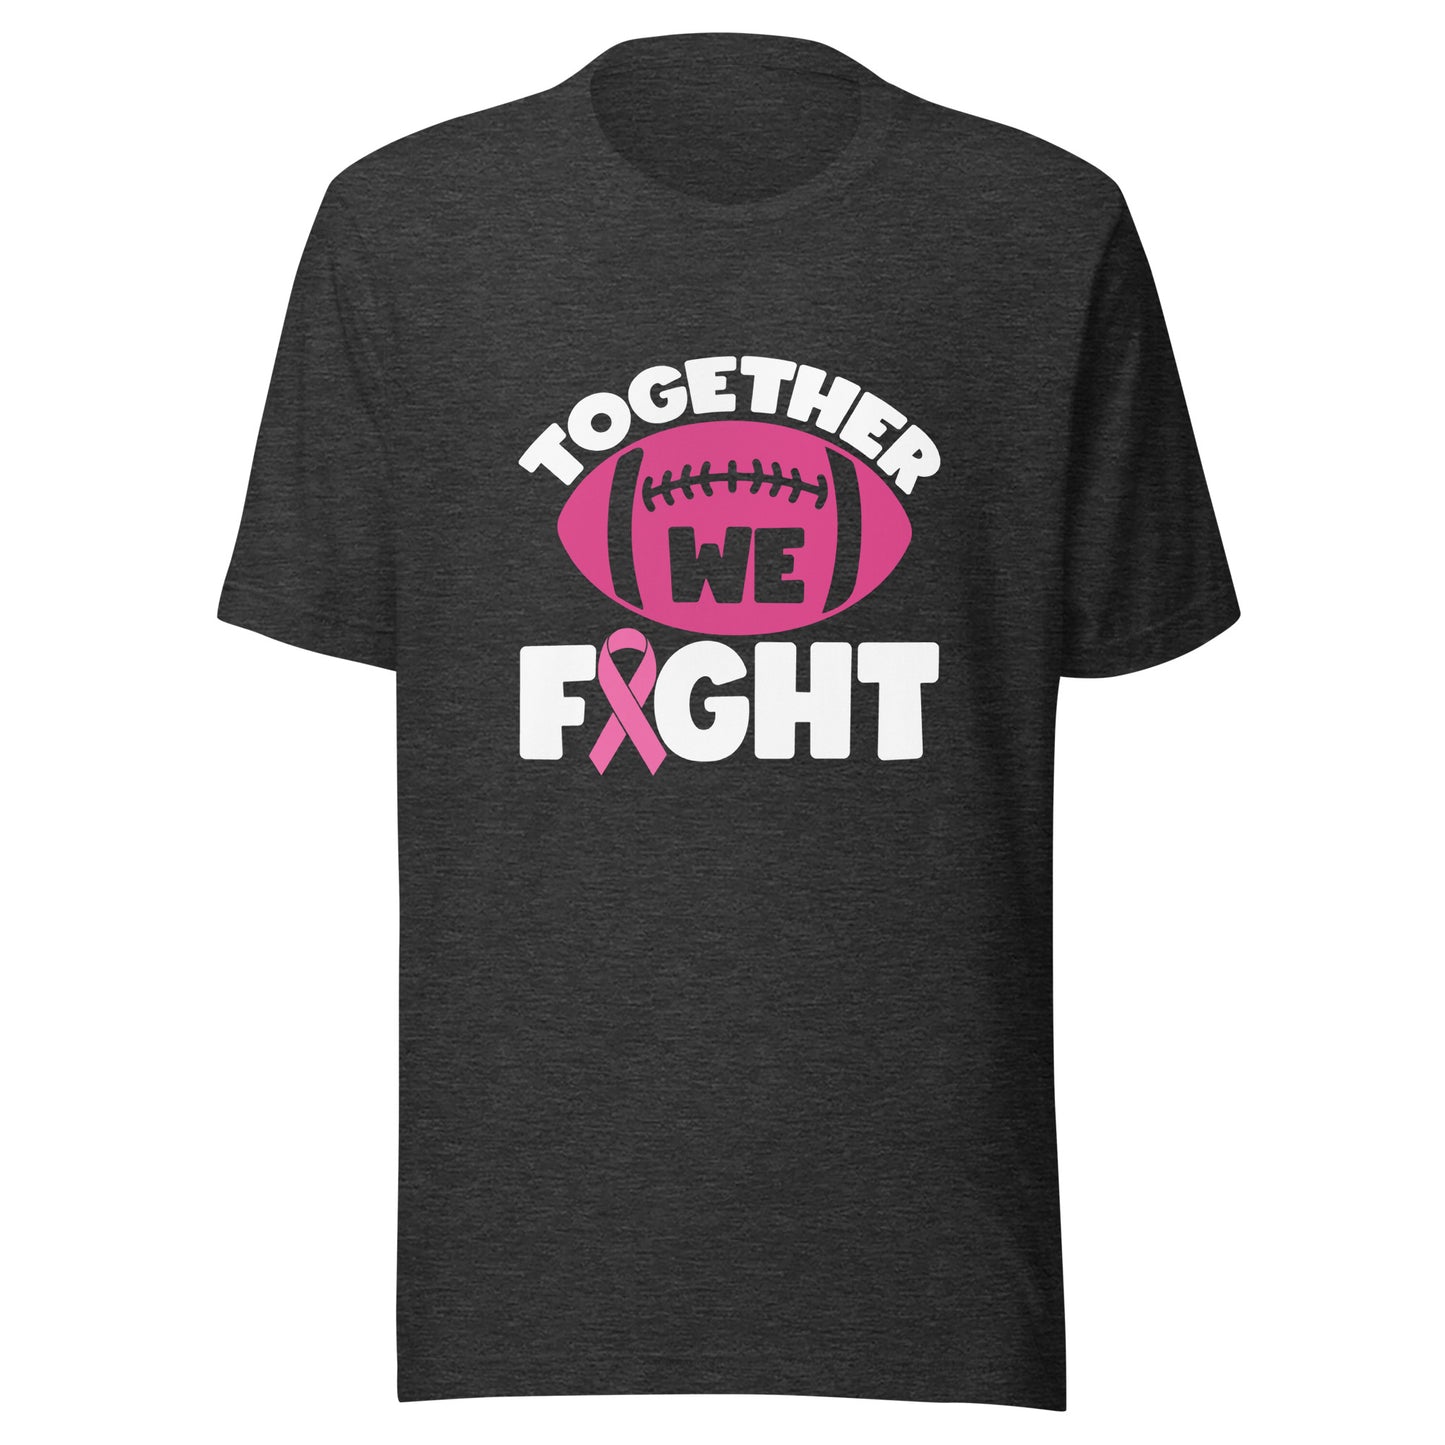 Together We Fight Football Breast Cancer Awareness Support Pink Ribbon Sport Unisex T-shirt